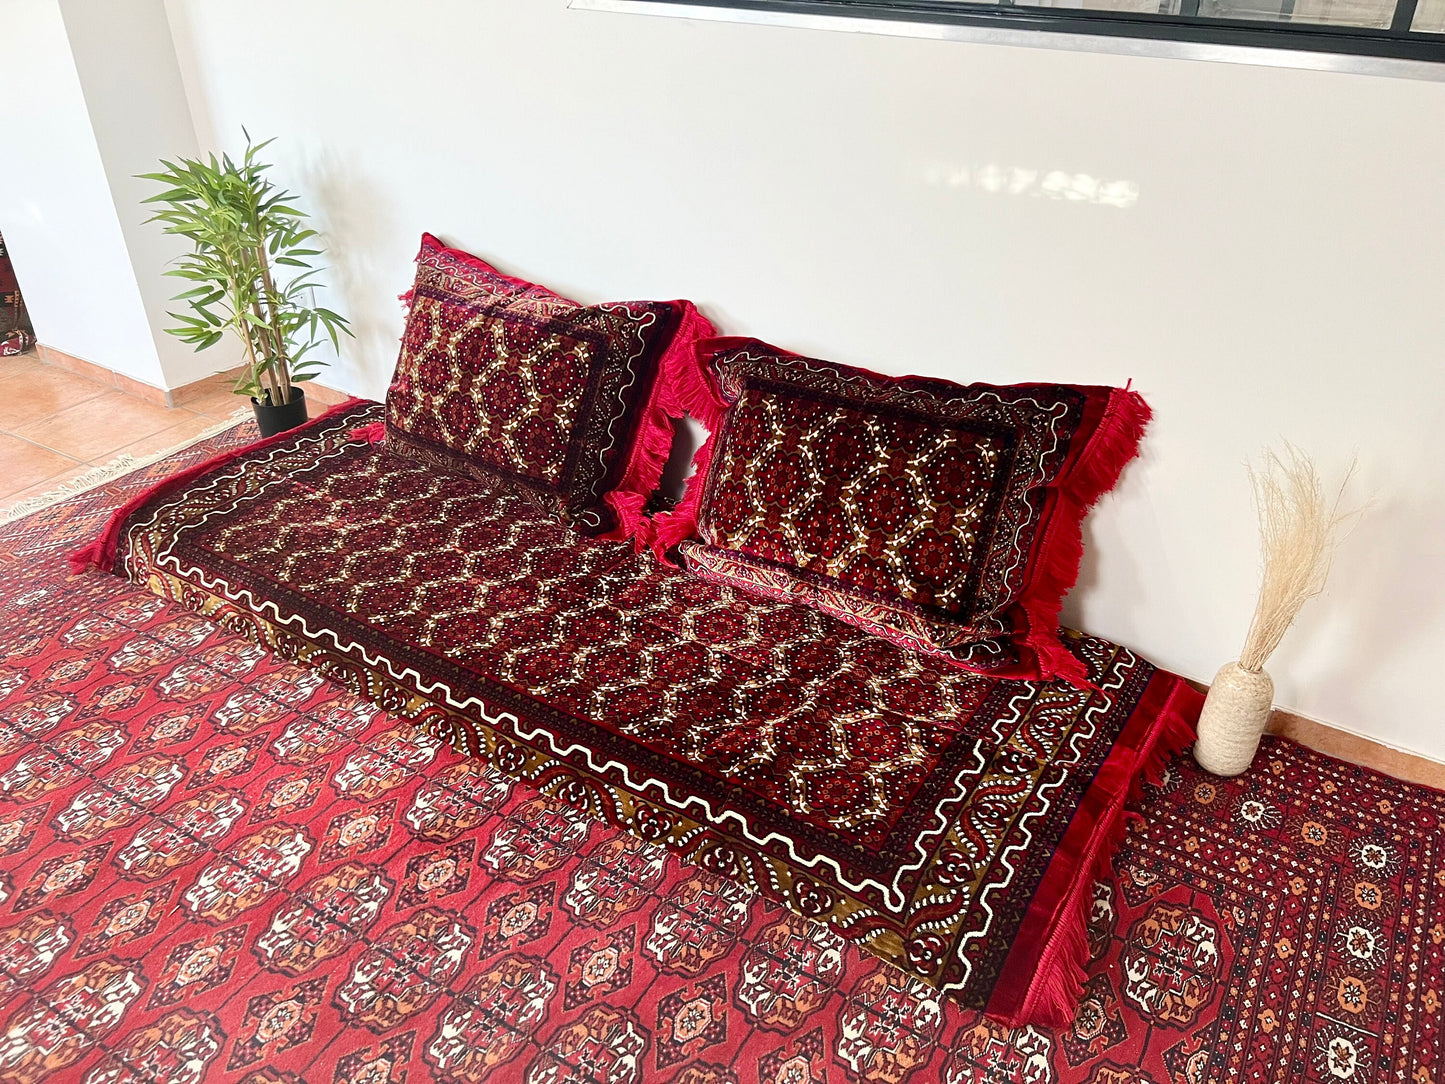 Arabic Majlis Floor cushion Seating, afghan toshak cover, Oriental Floor sofa set, 1 mattress cover + 2 pillows covers(3pcs cover only)